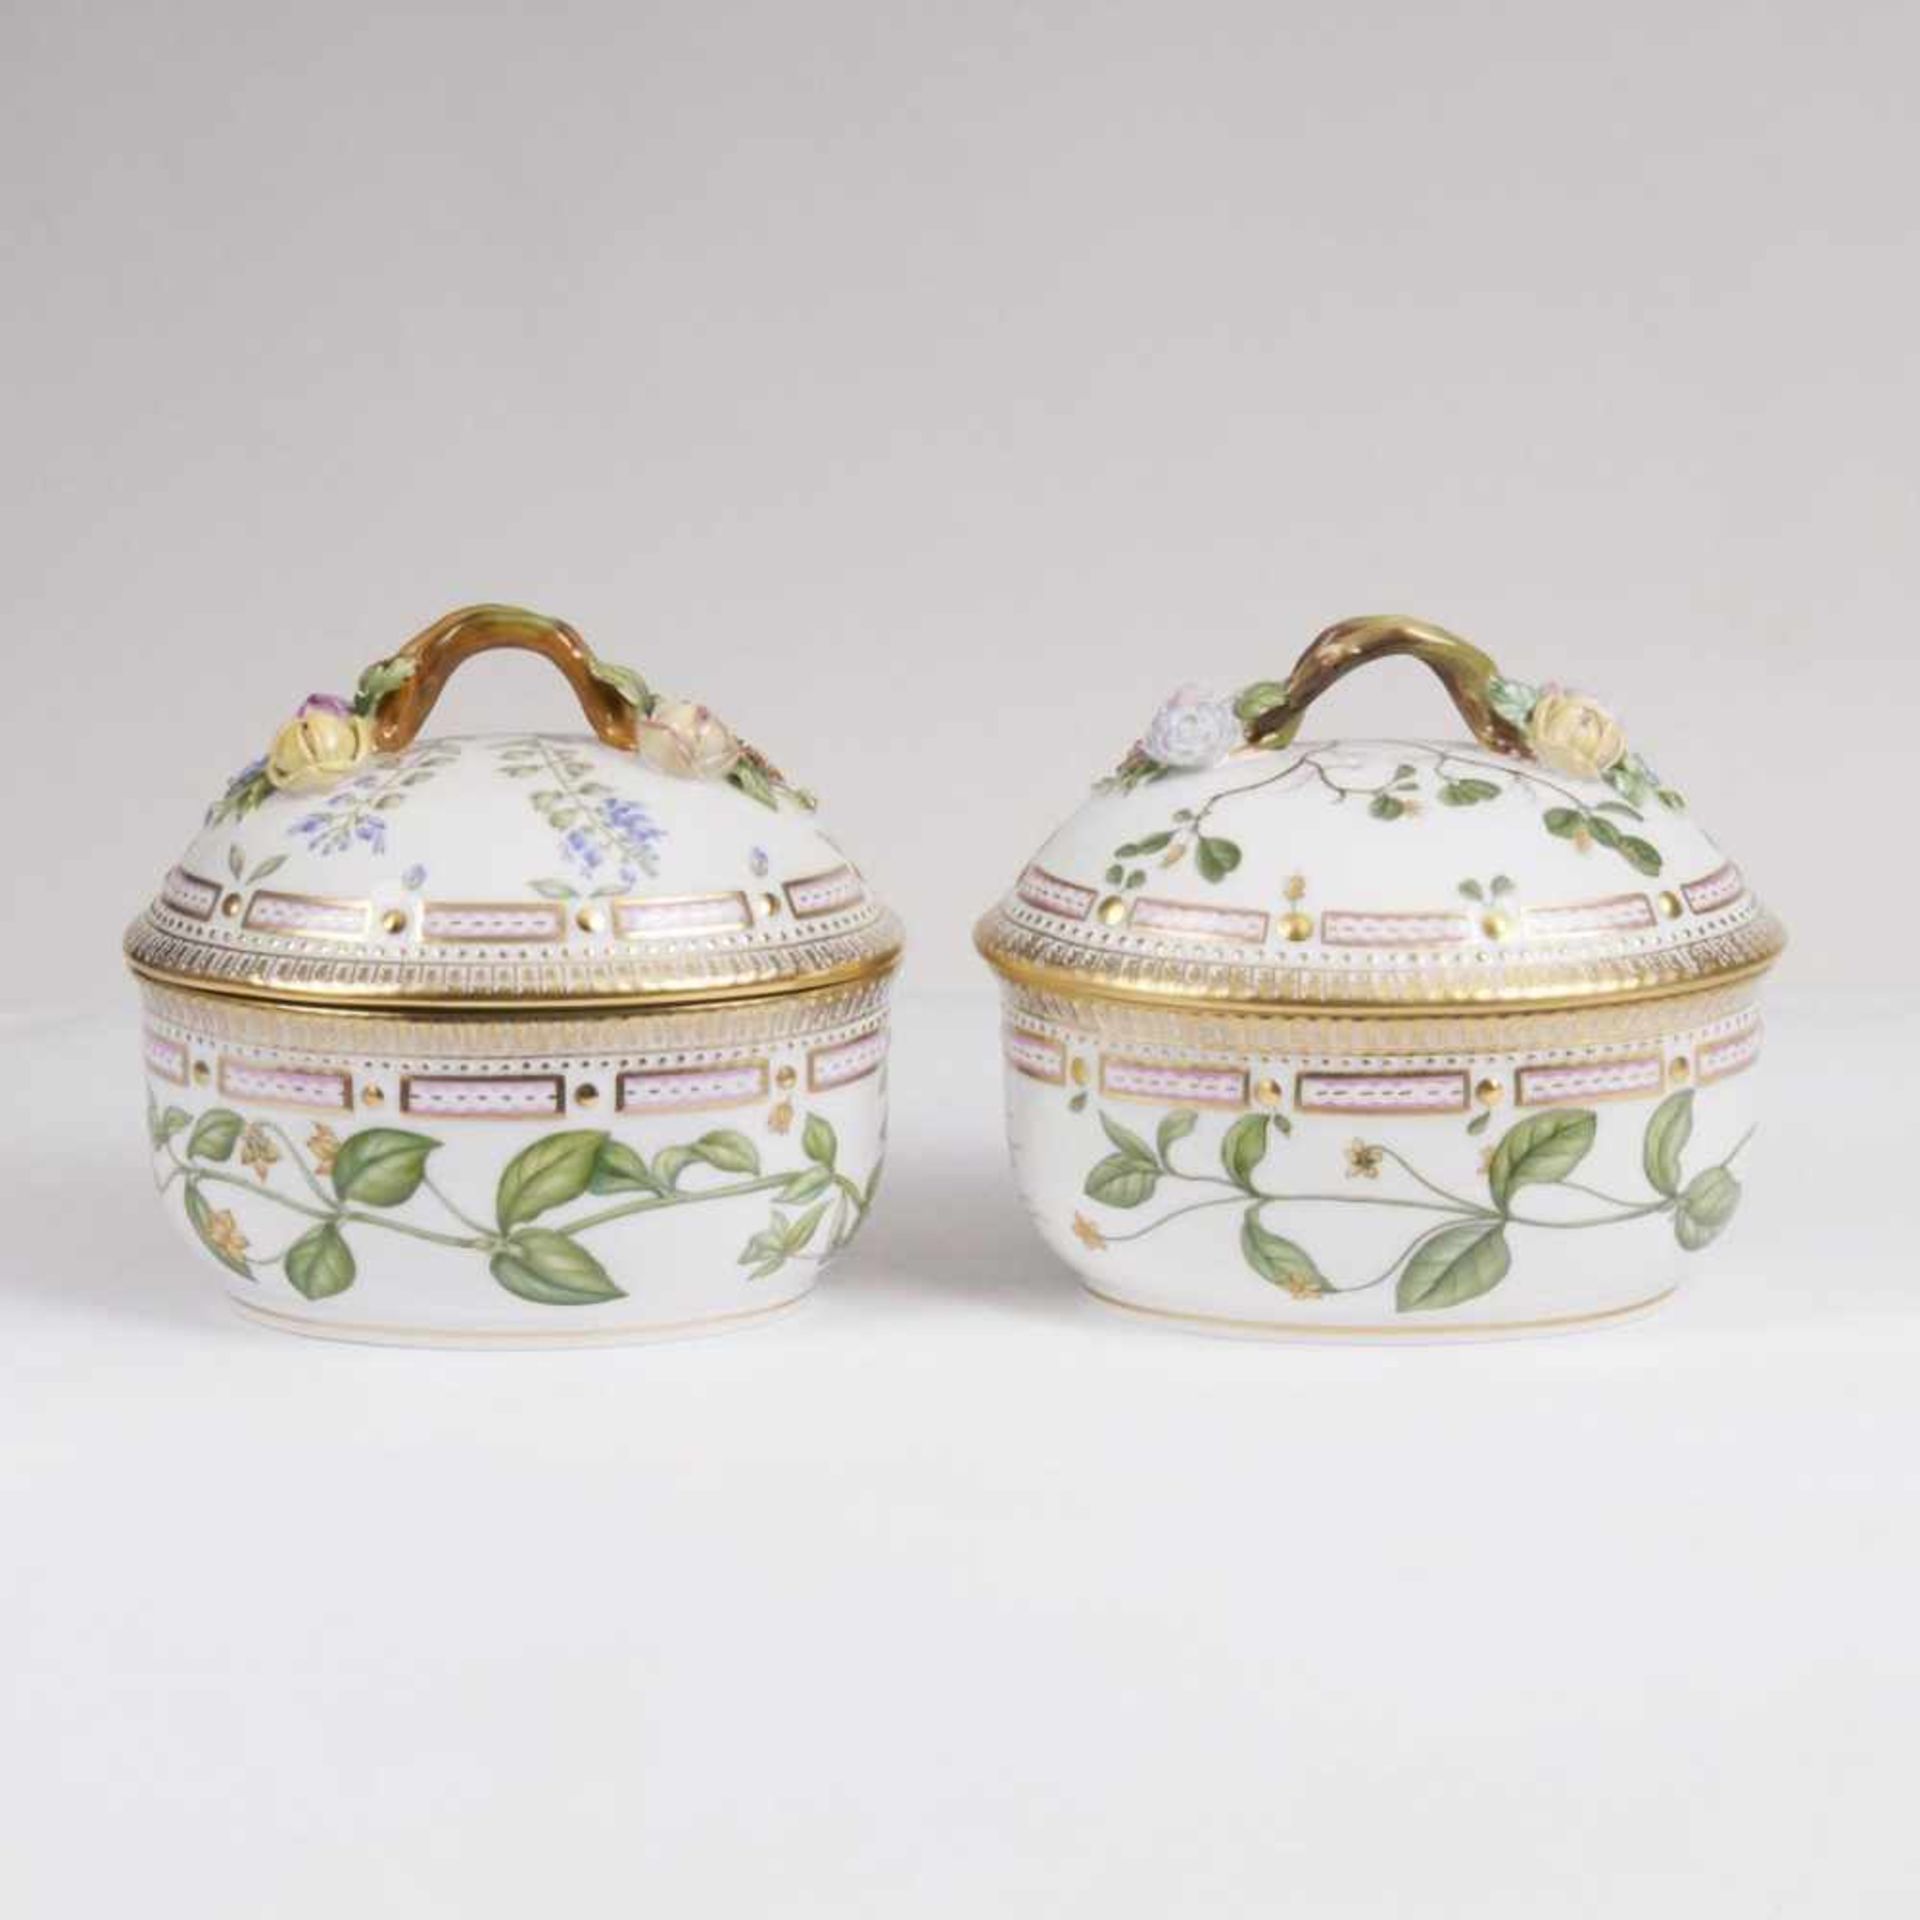 A Pair of Flora Danica Lidded Boxes of ChocolateRoyal Copenhagen, around 1970 and early 1990s.